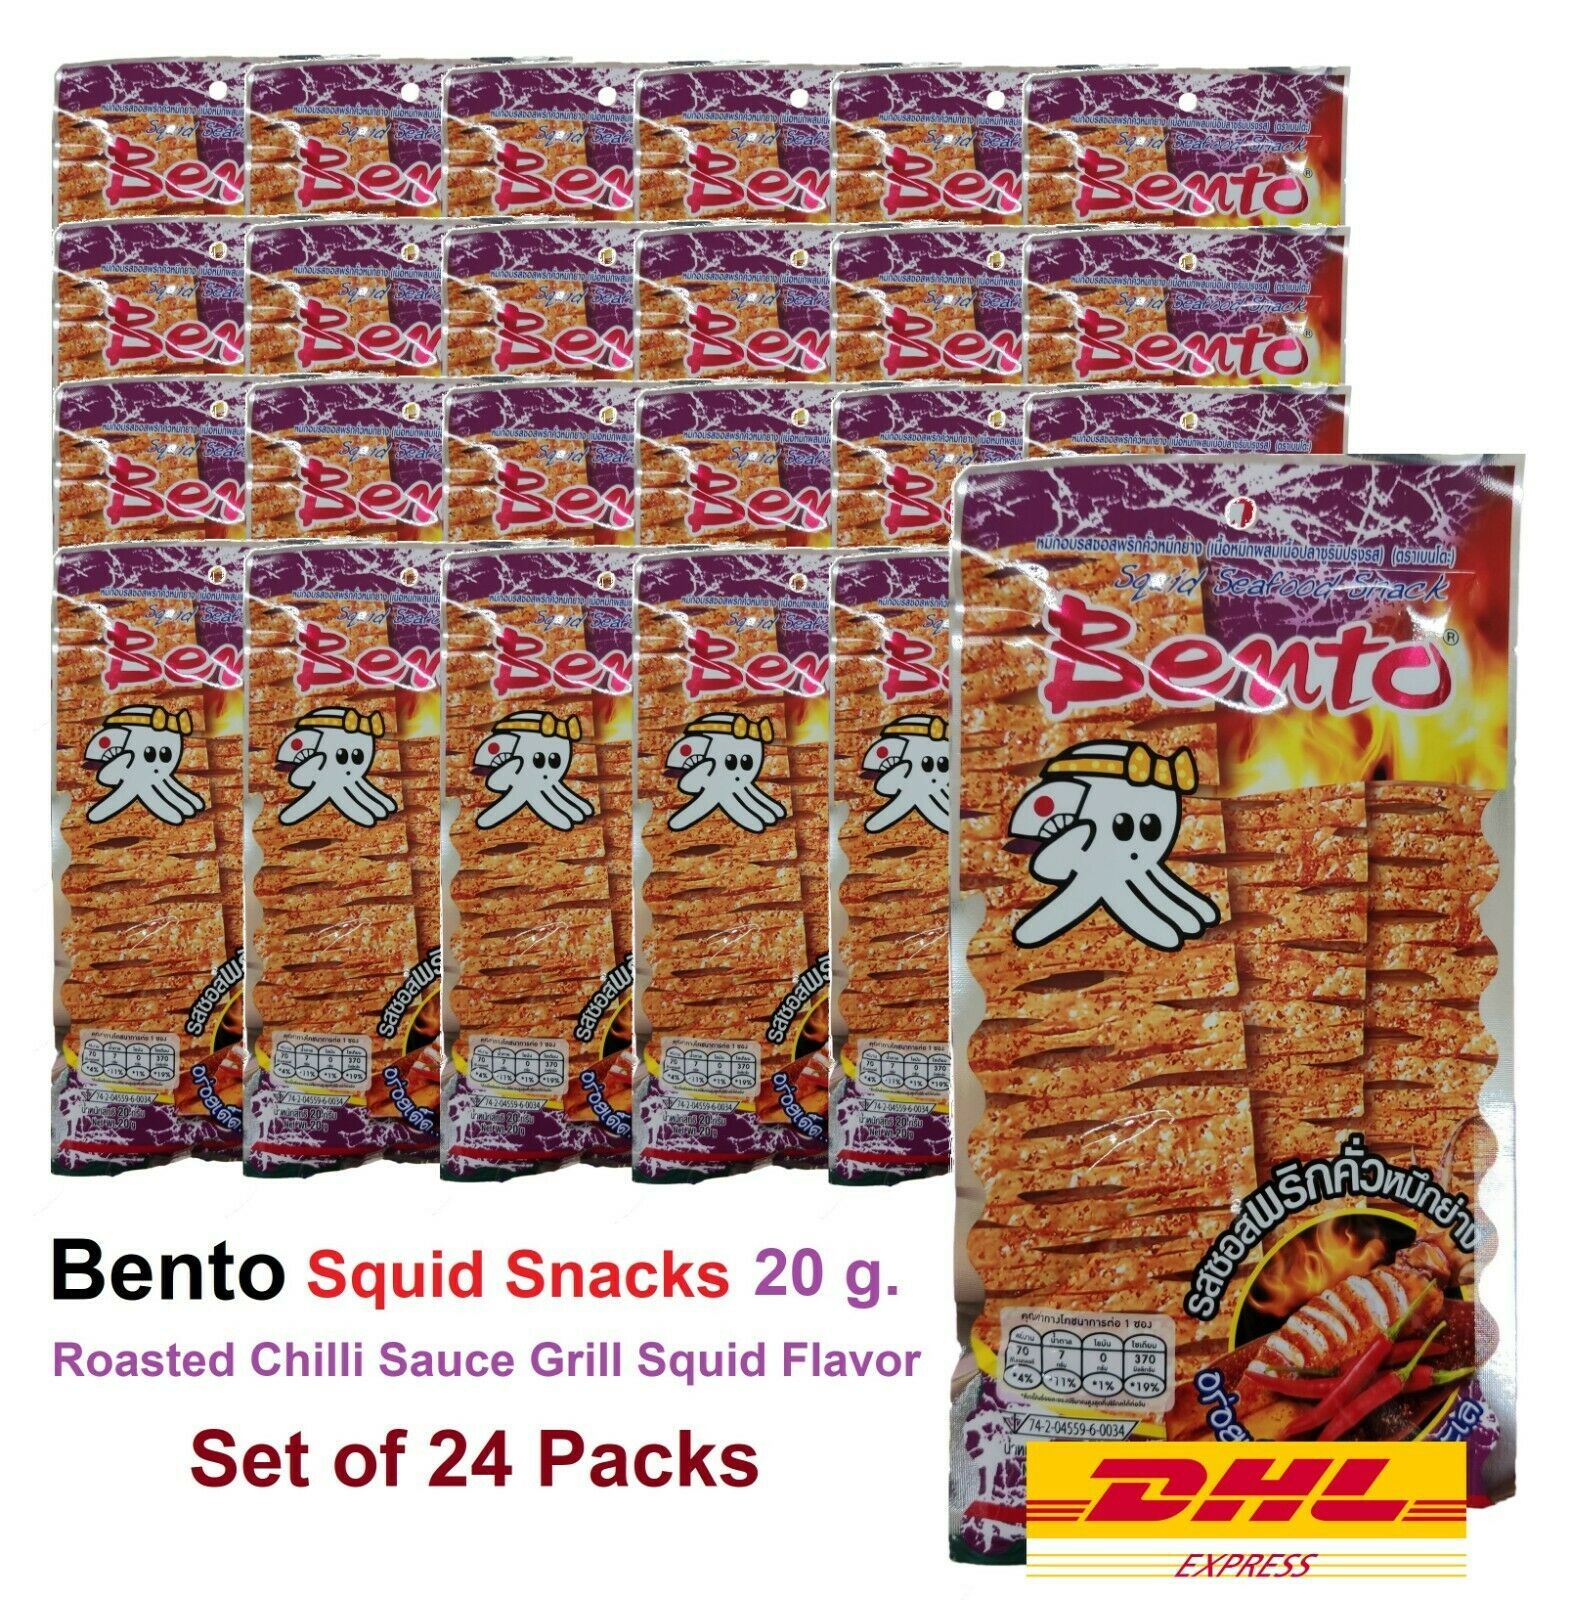 x24 BENTO SQUID Roasted Chilli Sauce Grill Squid Flavor SEAFOOD SNACK 20g